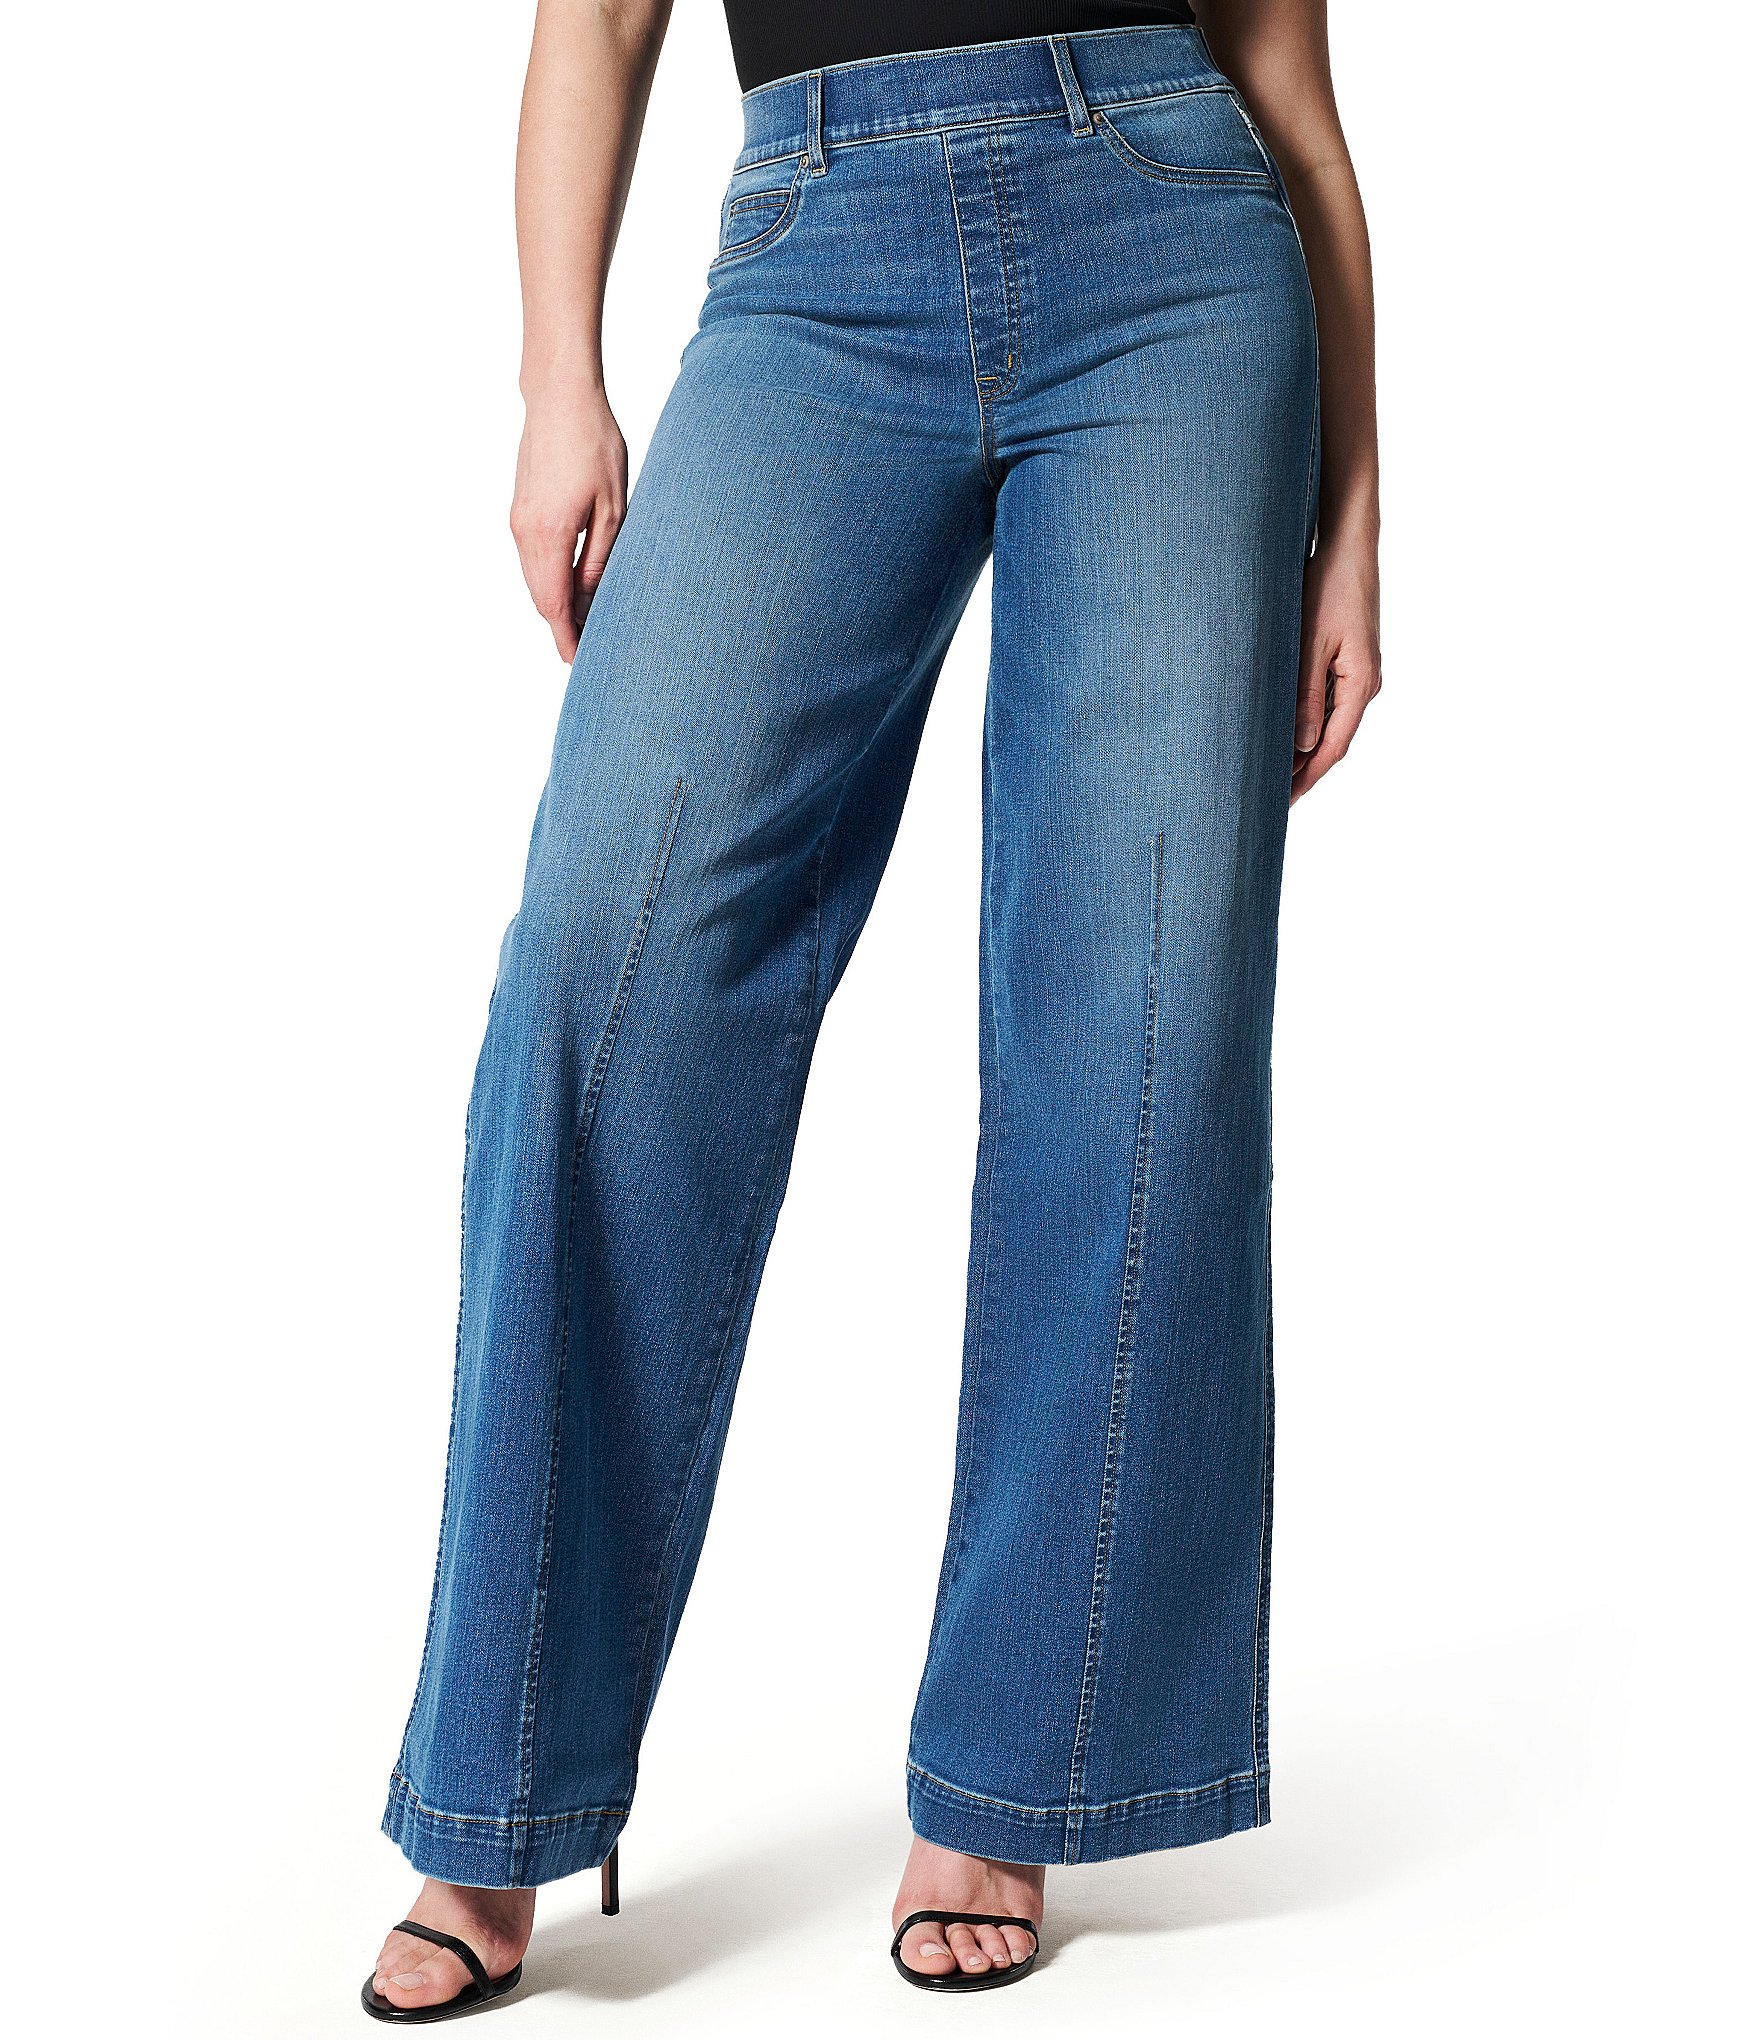 Let's try the new @spanx wide leg jeans! I got the small tall and